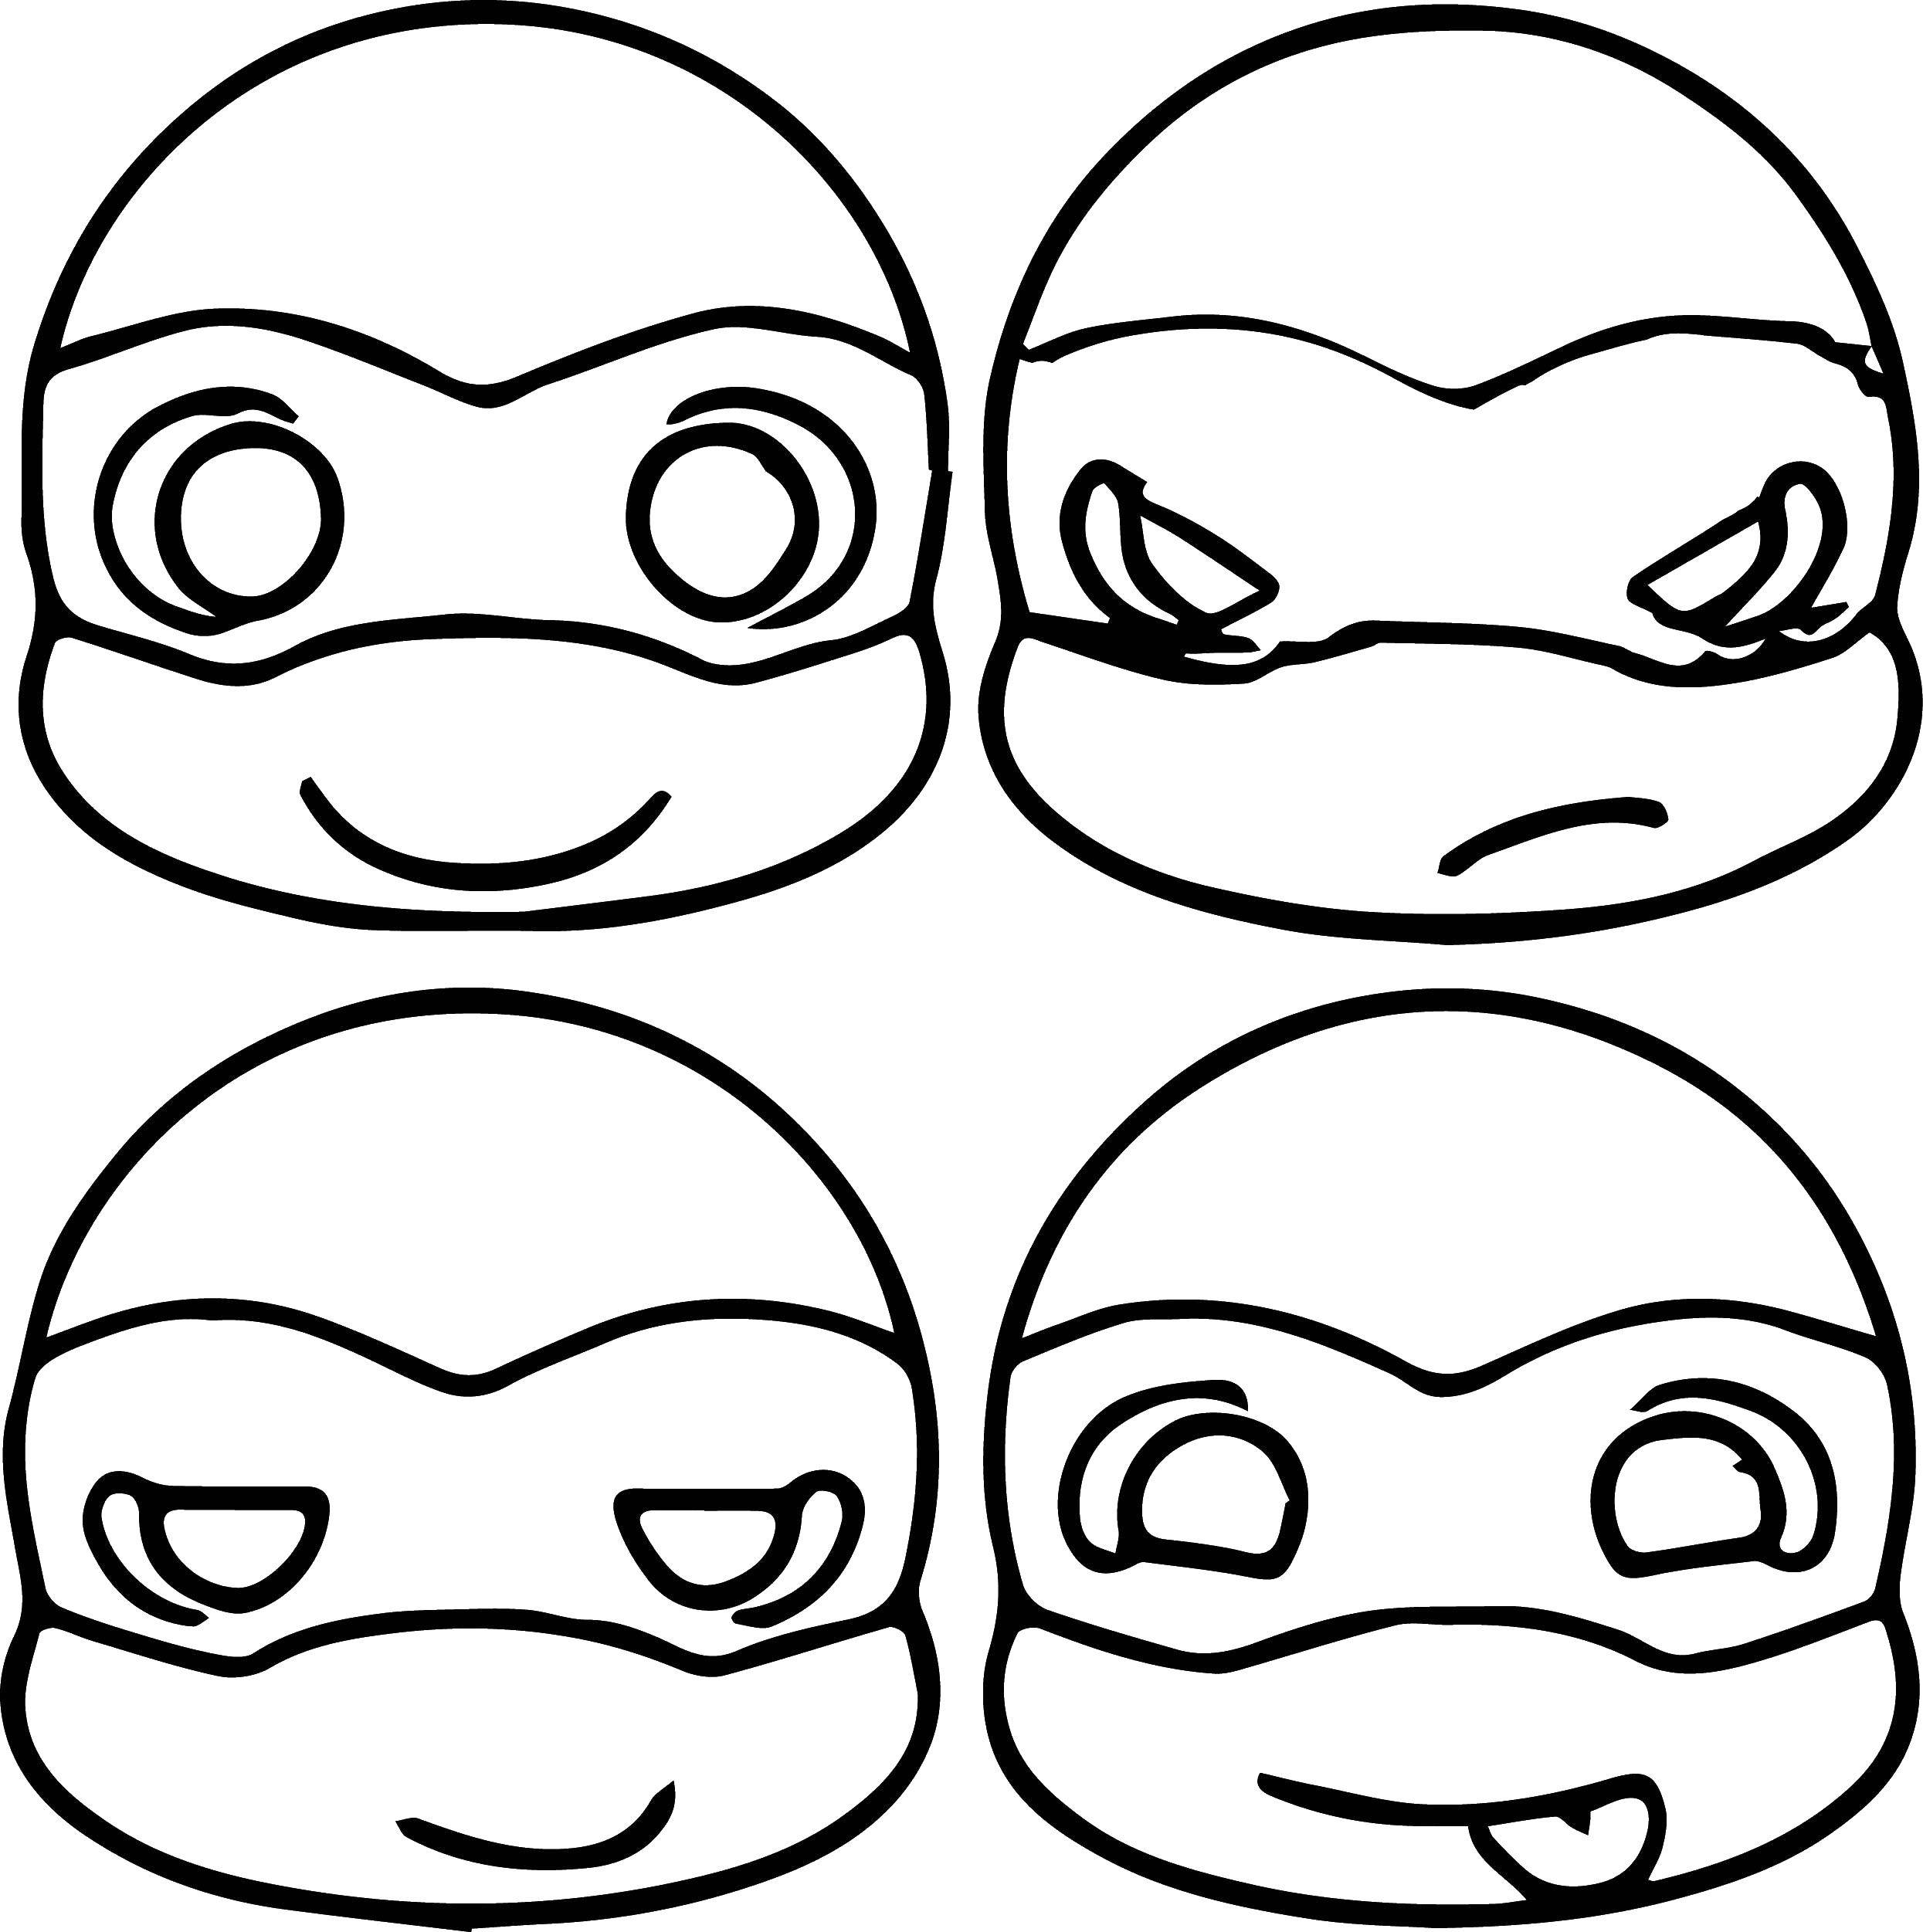 Coloring Faces of the ninja turtles. Category teenage mutant ninja turtles. Tags:  cartoon ninja turtles.